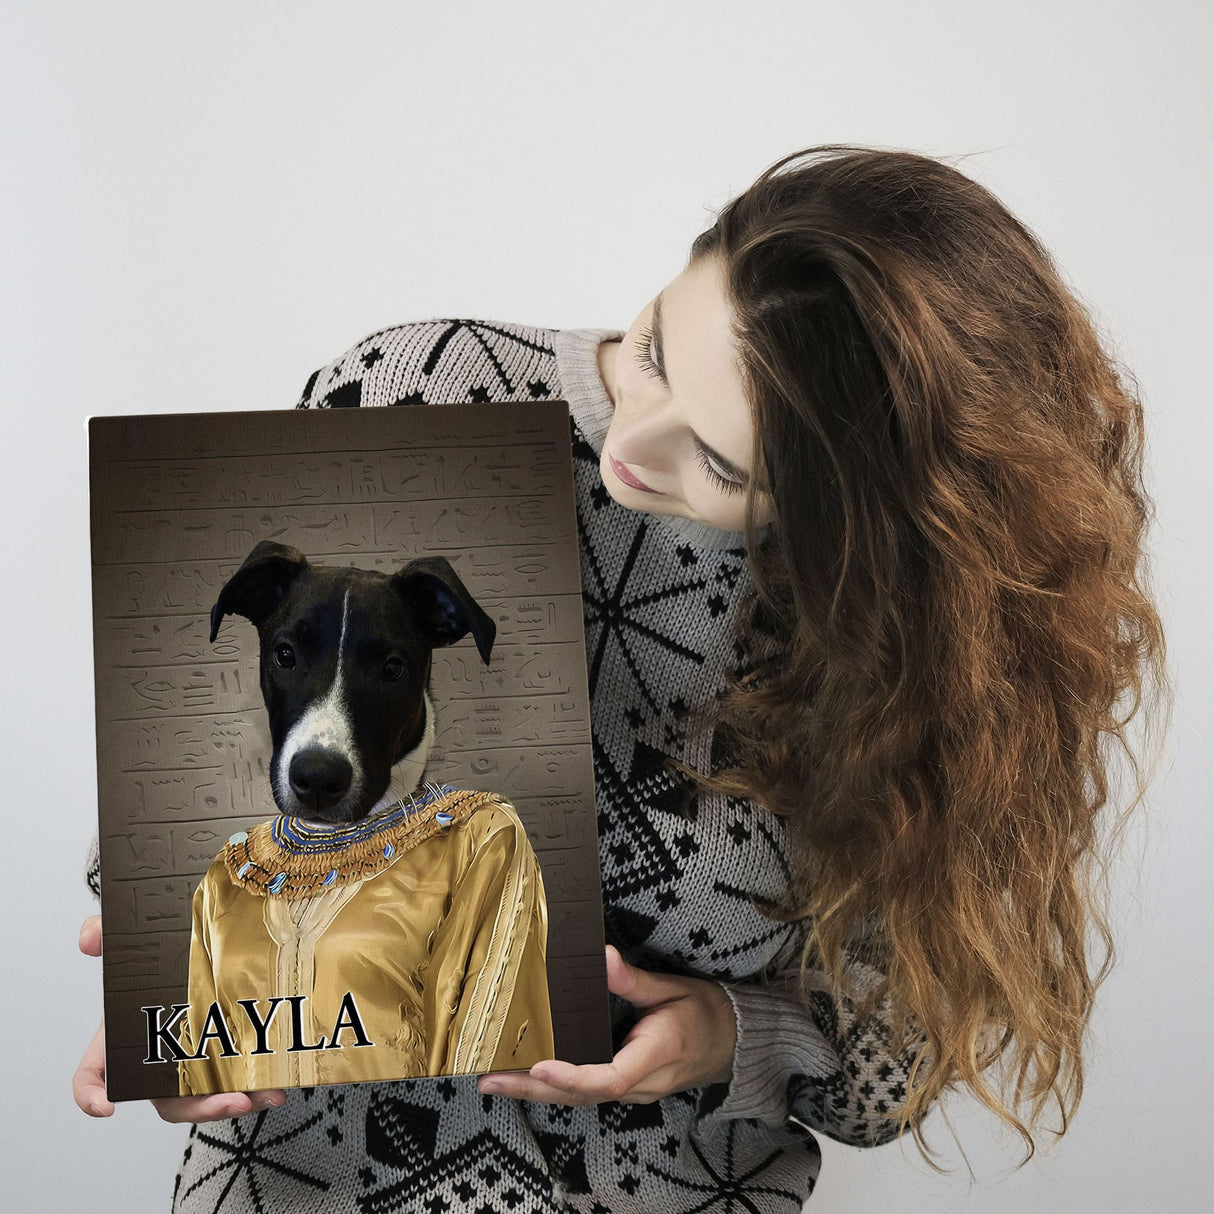 Posters, Prints, & Visual Artwork Dog Lovers - Kayla Dog - Personalized Pet Poster Canvas Print